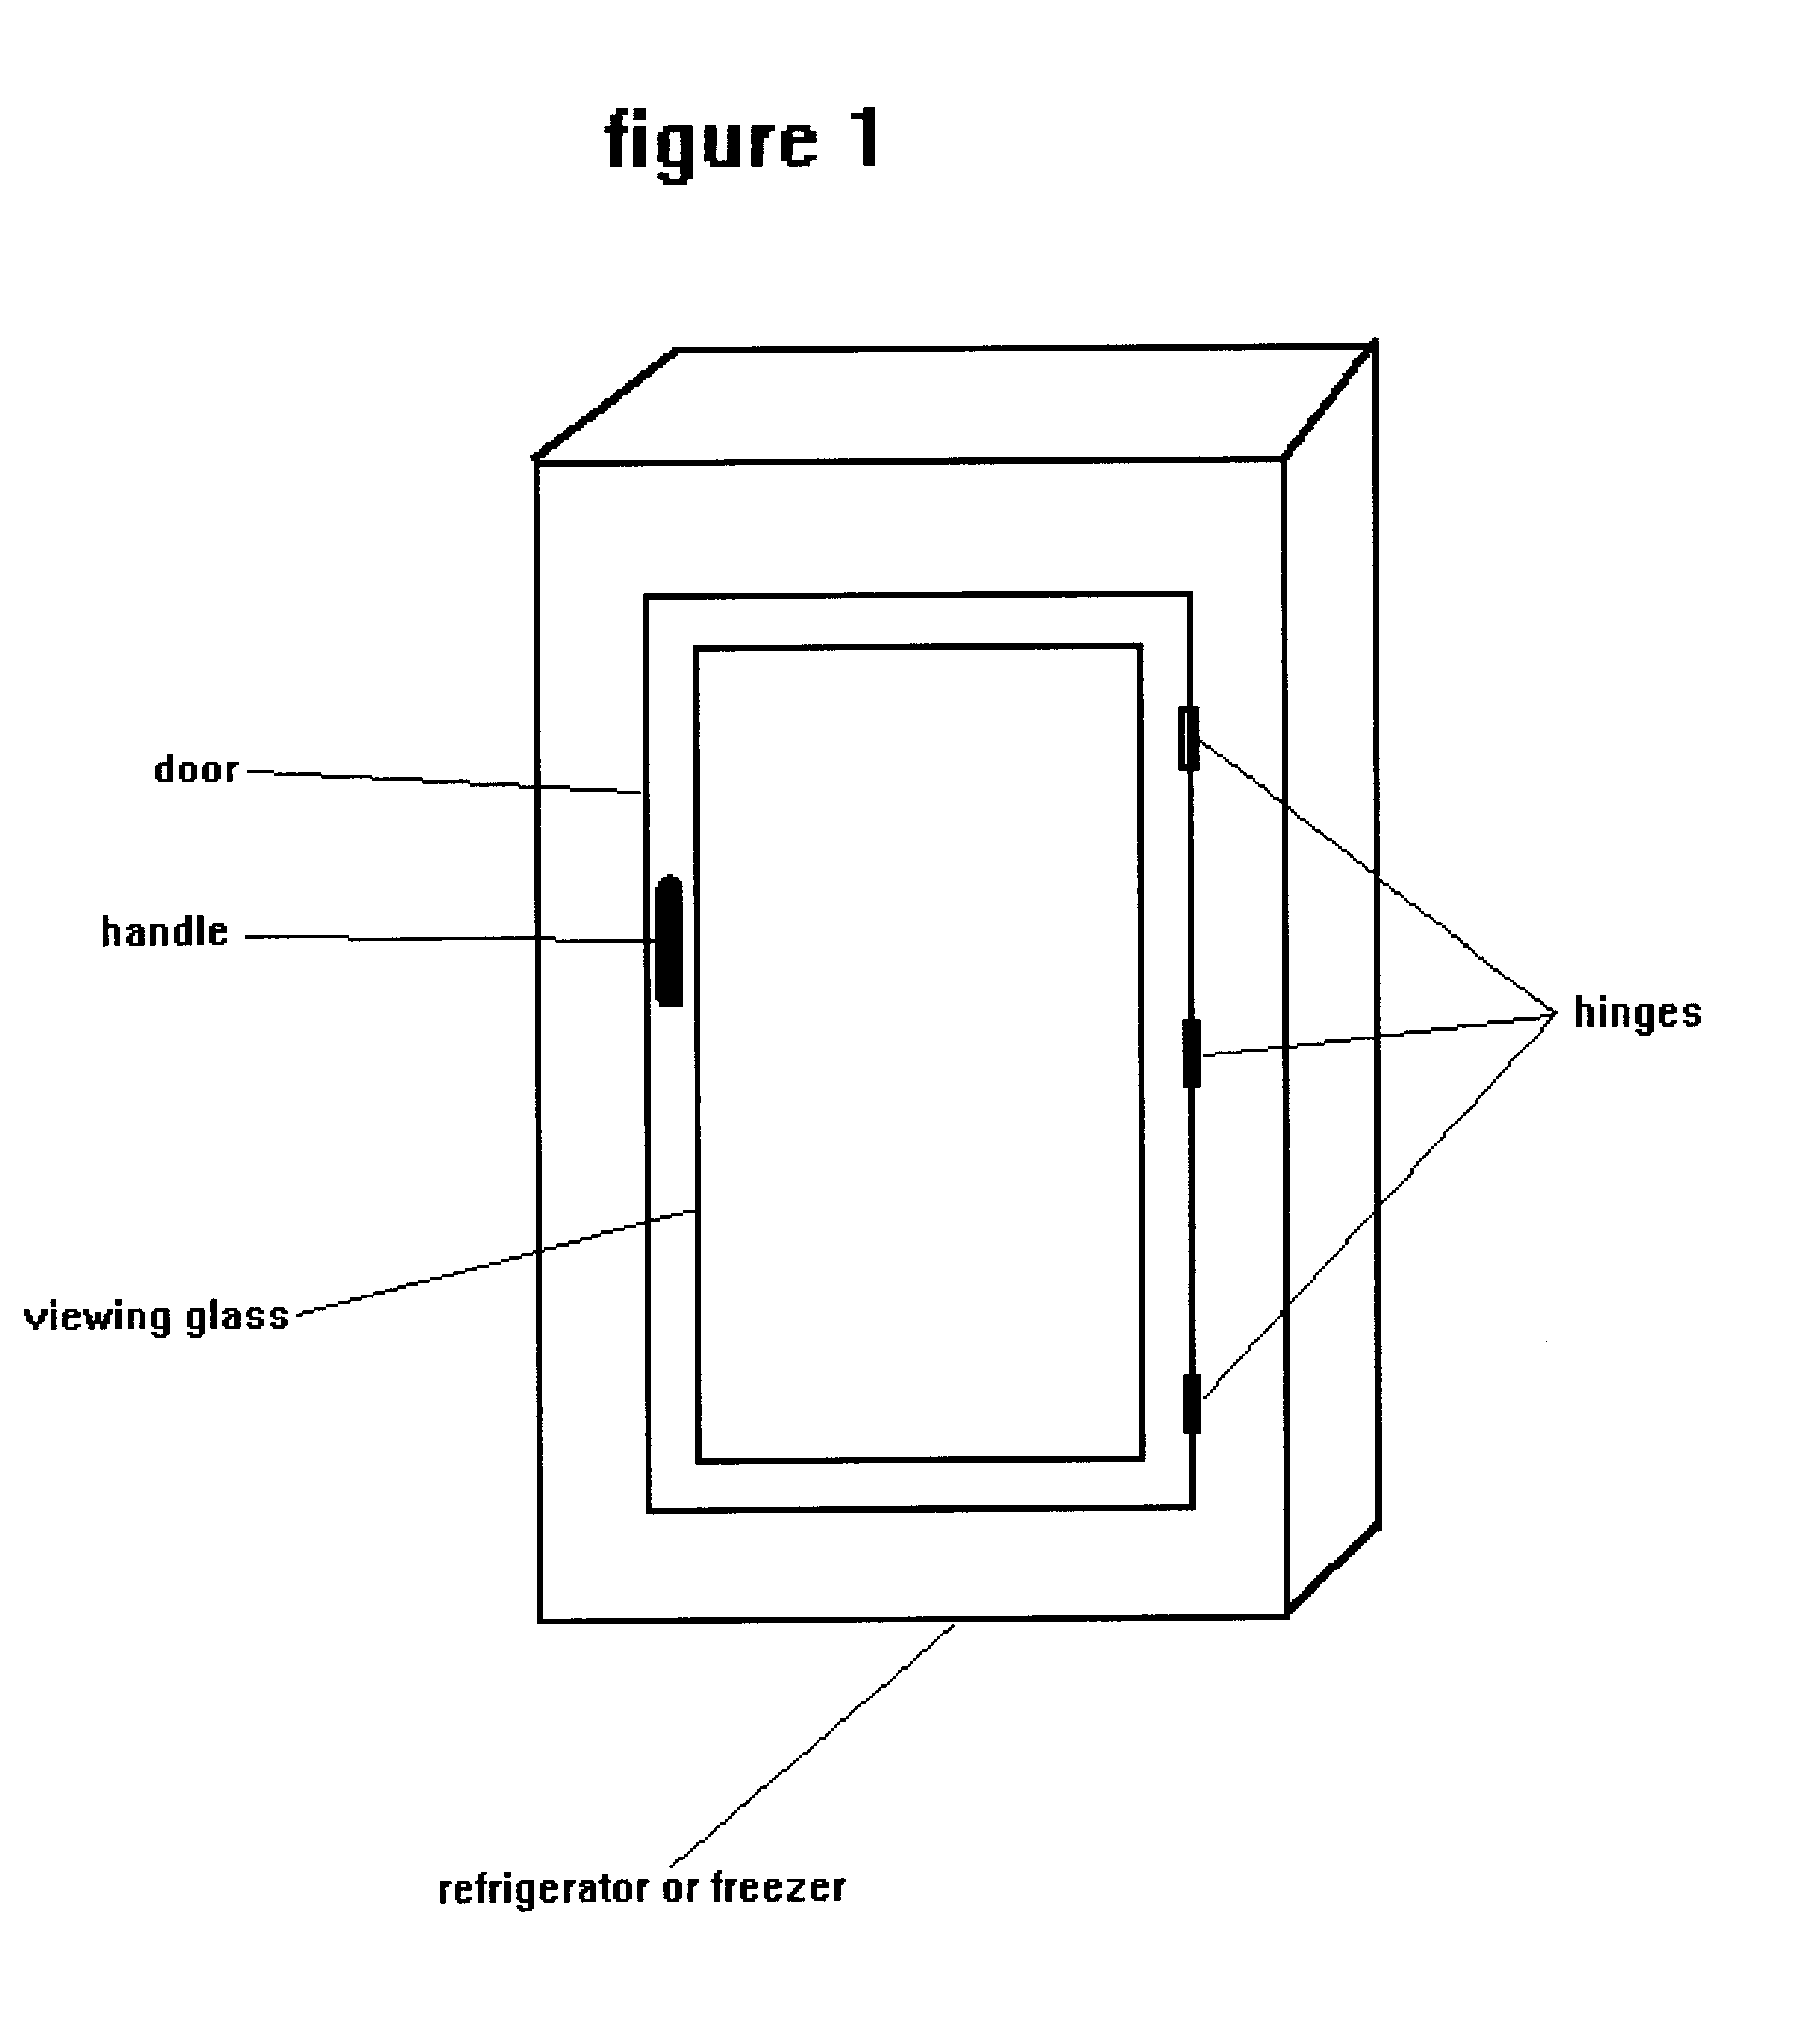 Appliance such as a refrigerator or freezer with a transparent viewing door and a method of manufacture of a refrigerator or freezer with a transparent viewing door